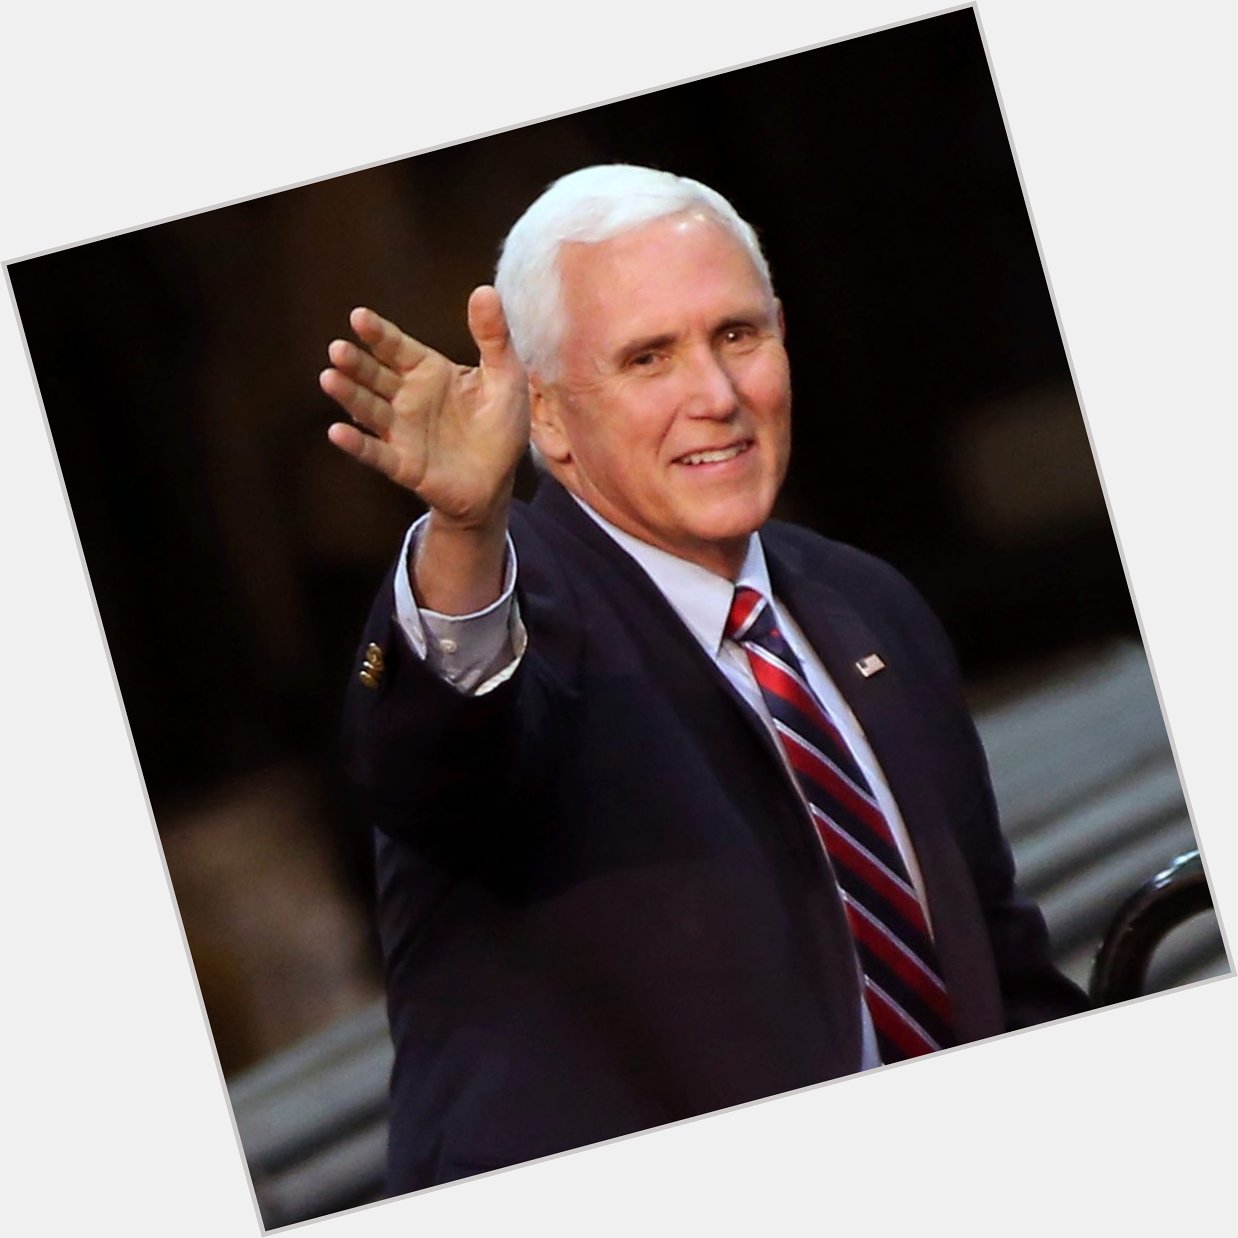 HAPPY BIRTHDAY, VICE PRESIDENT!  Mike Pence turns 60 today. 